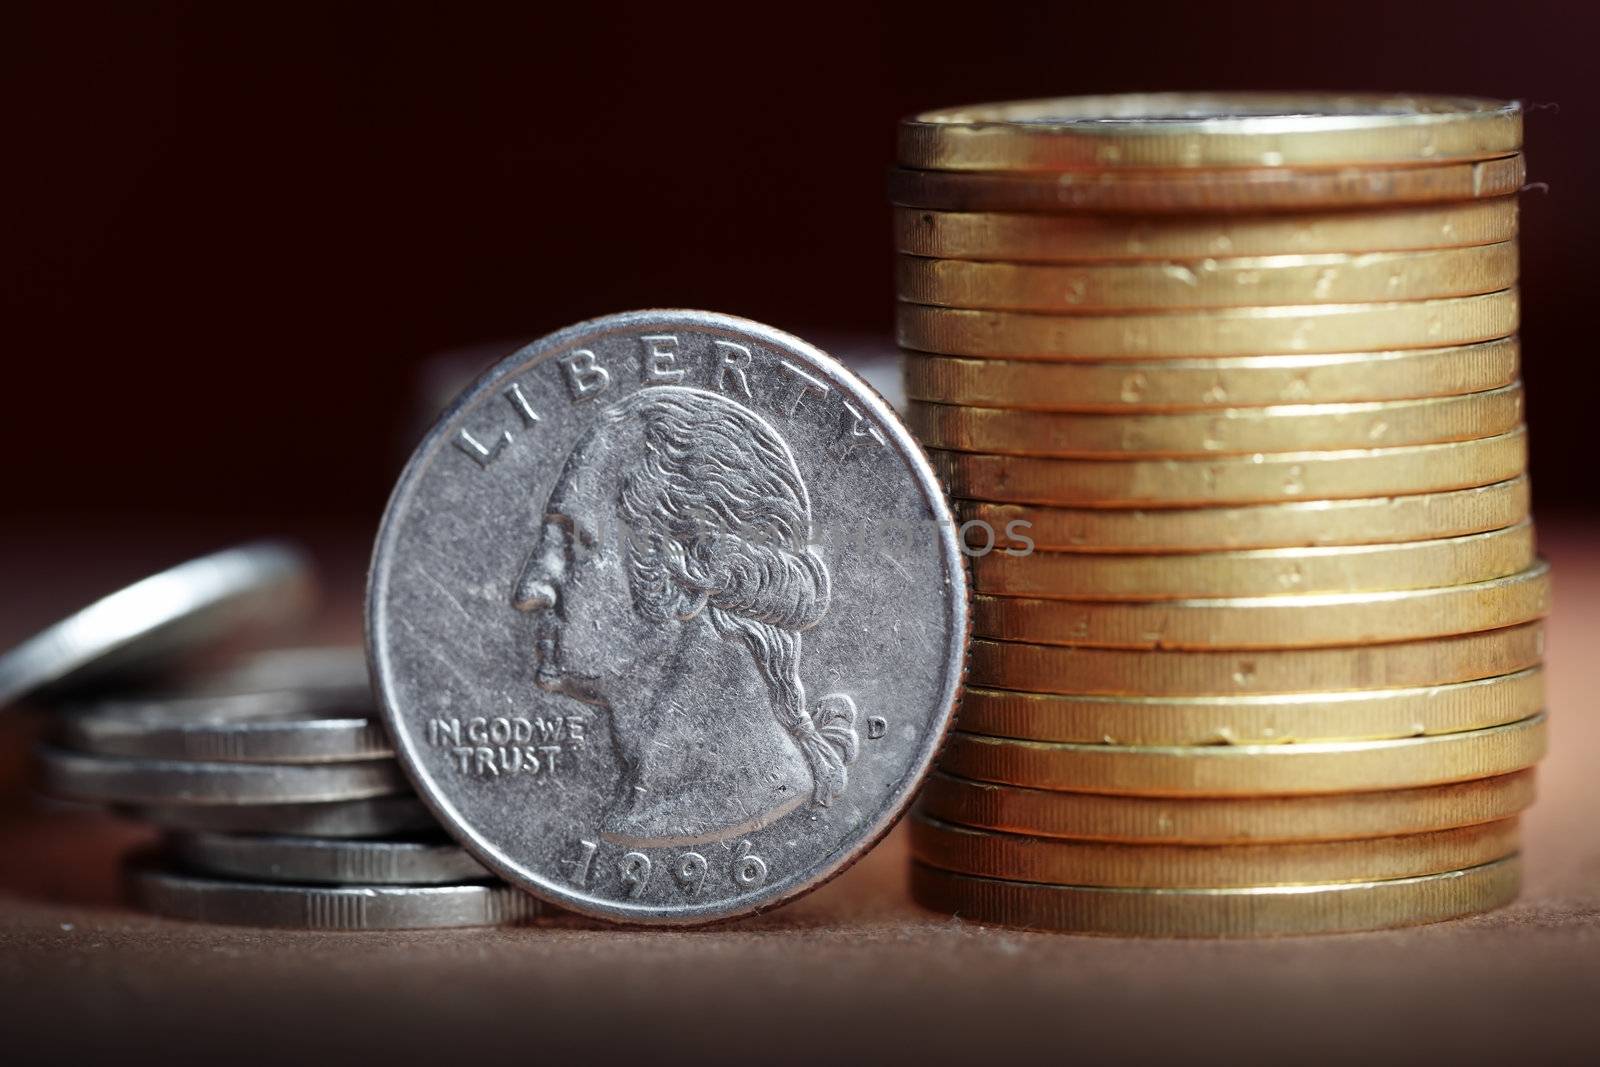 Macro photo of the US dollar coin